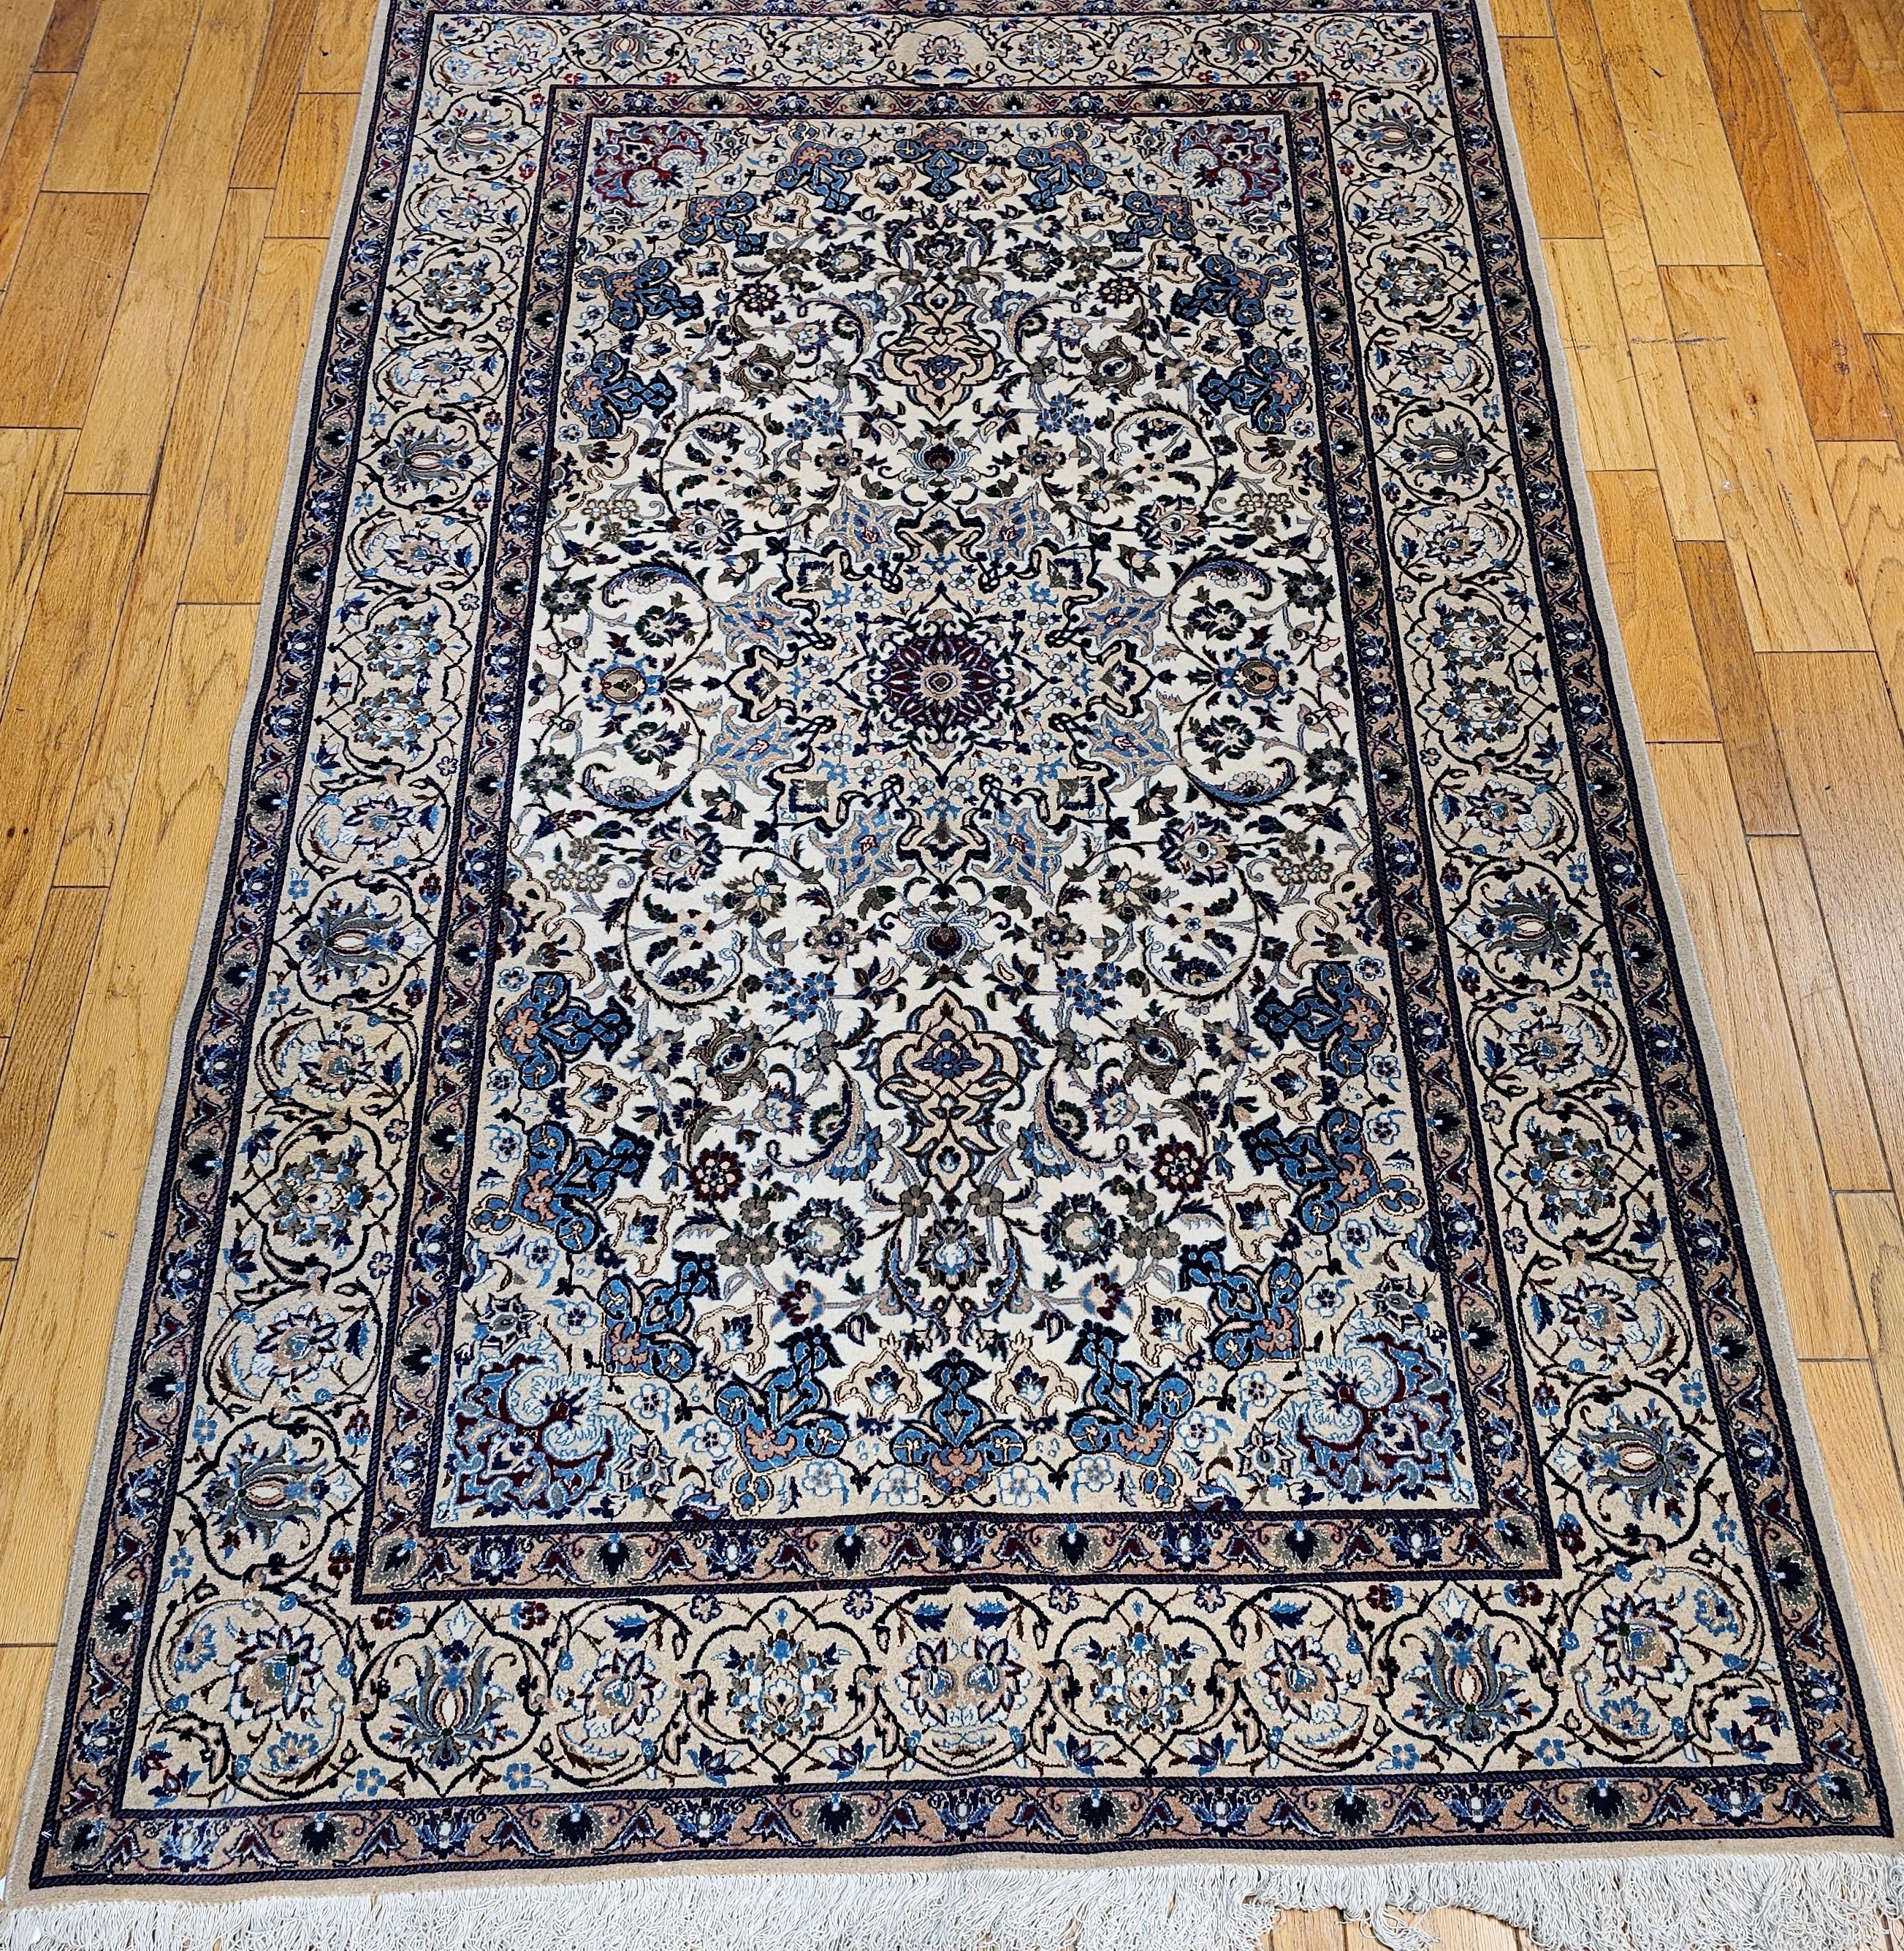  Vintage Persian Nain is in a very unique design and color palate. This Nain has a cream color field and beige color border in a floral pattern and a central medallion is very distinct from the typical Nain design. The use of organic vegetable dyes